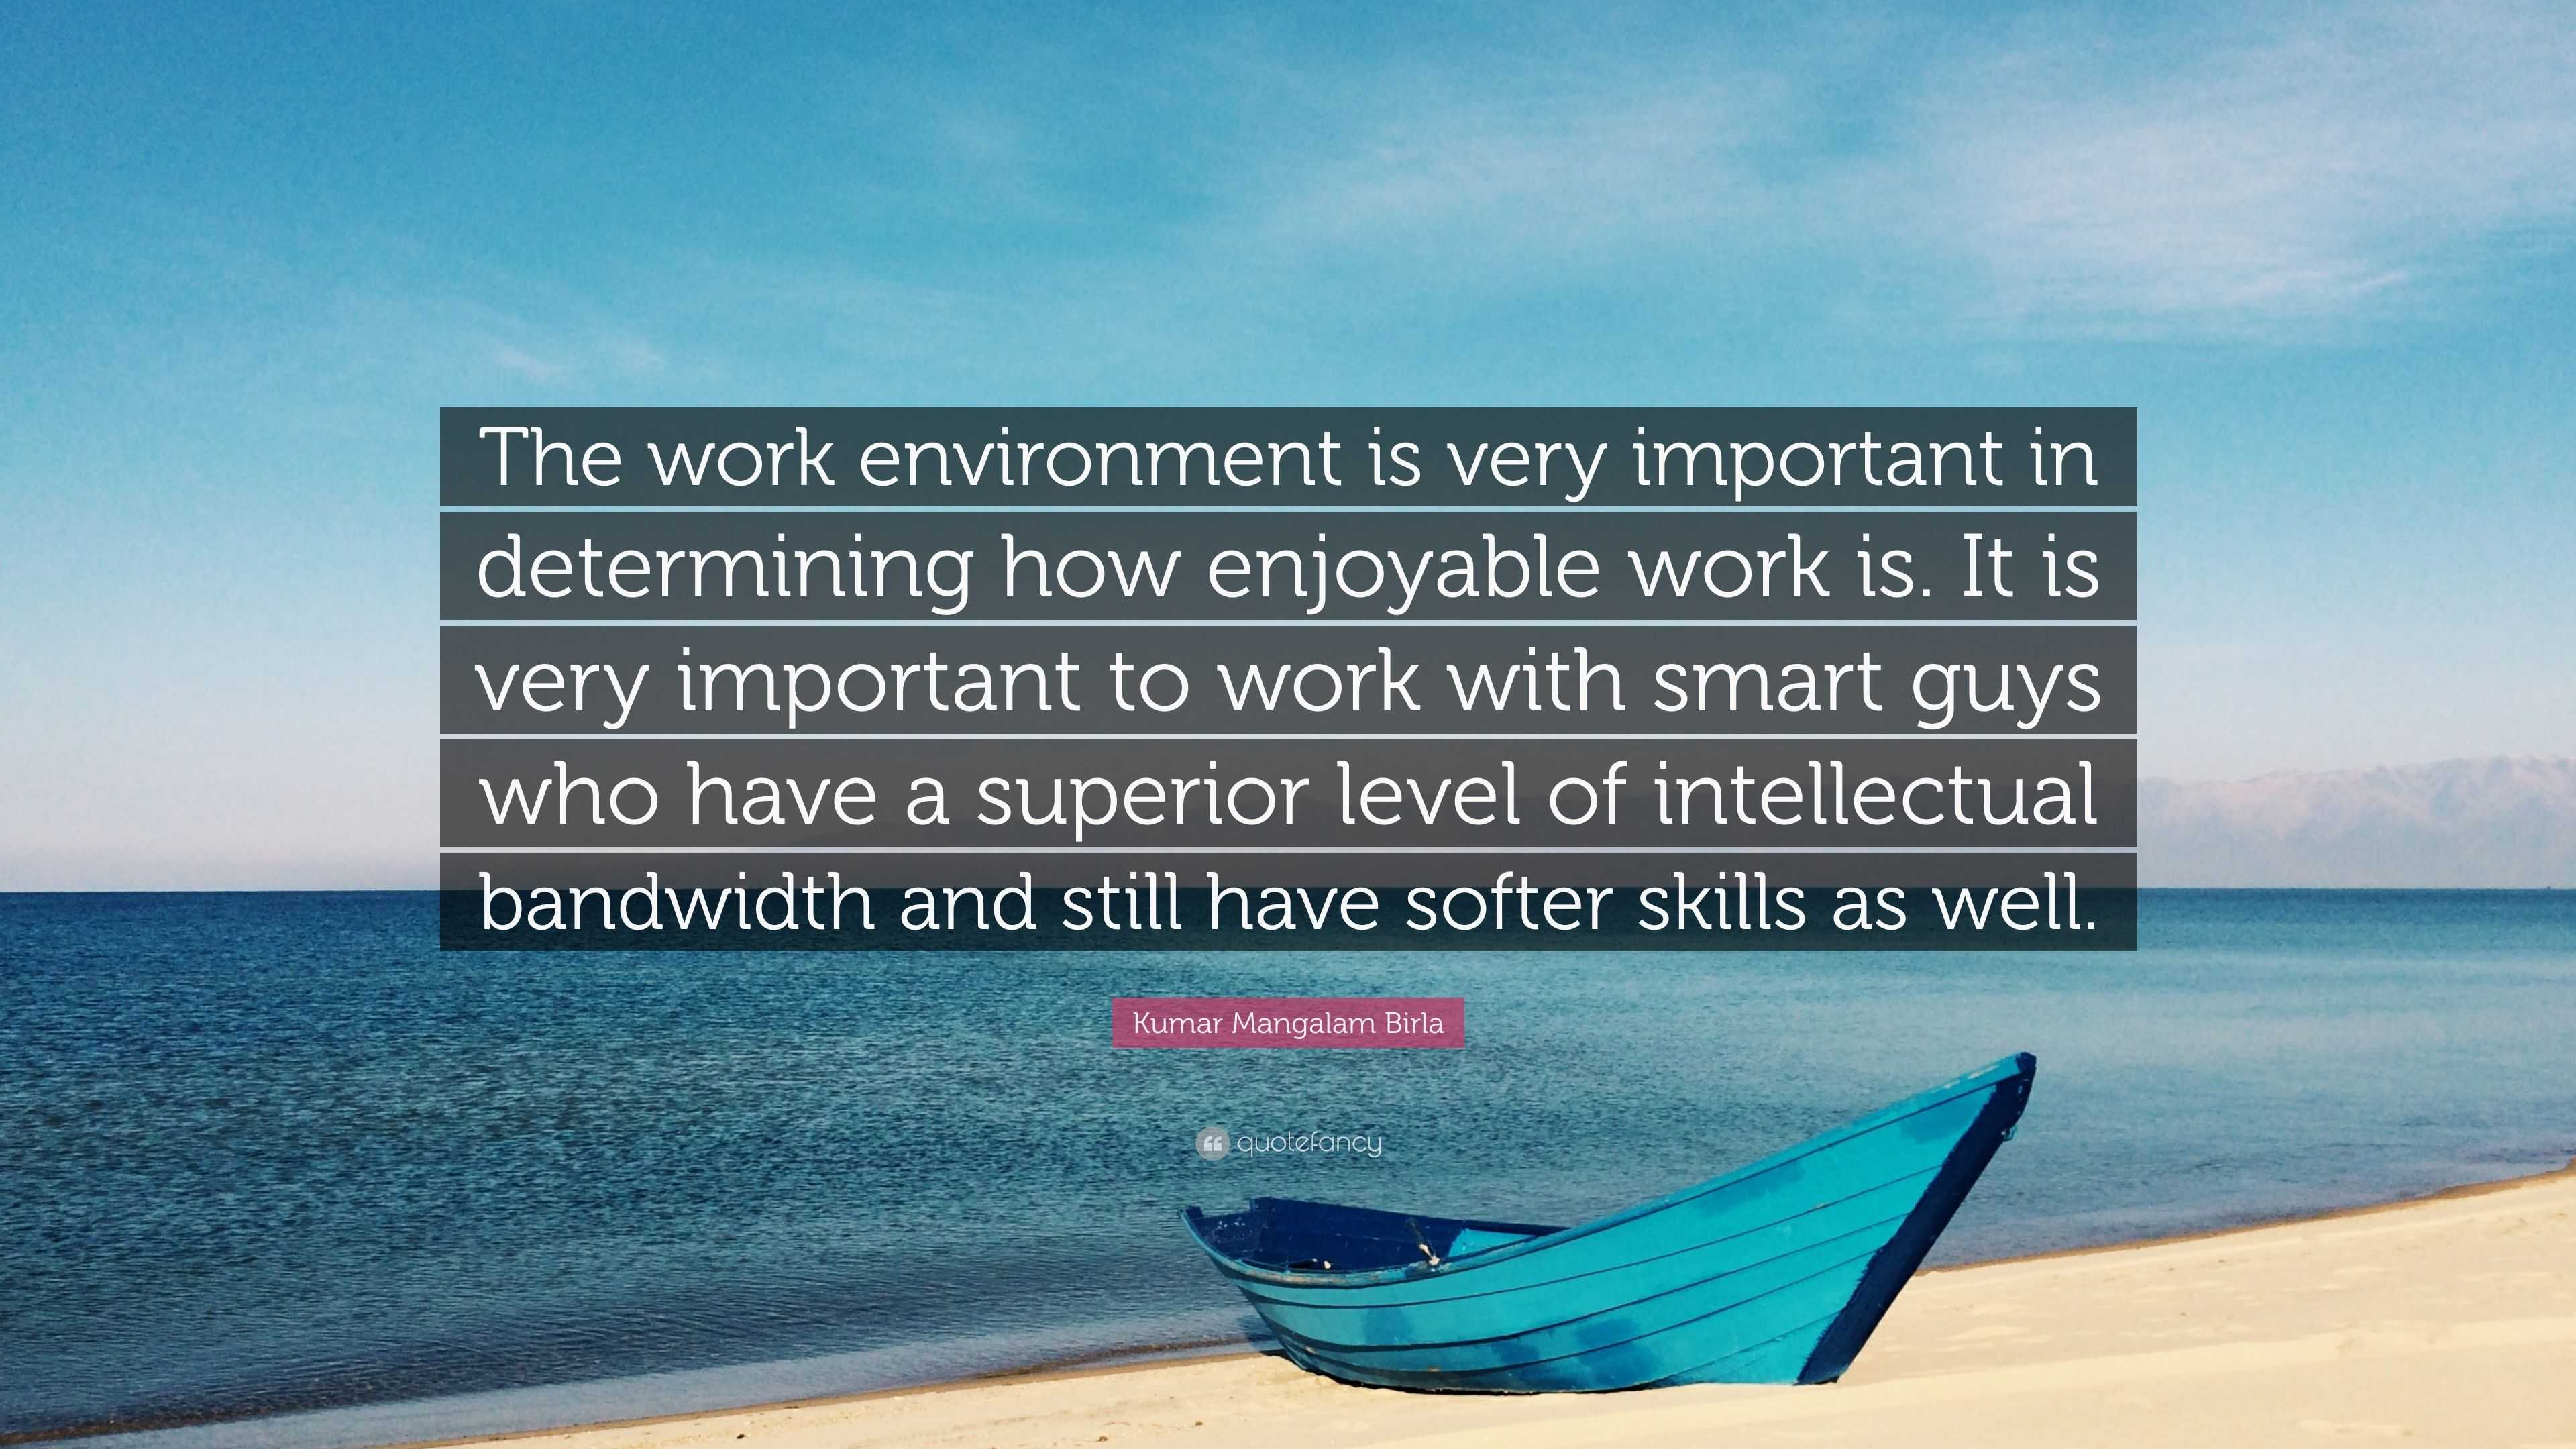 Kumar Mangalam Birla Quote: “The work environment is very important in